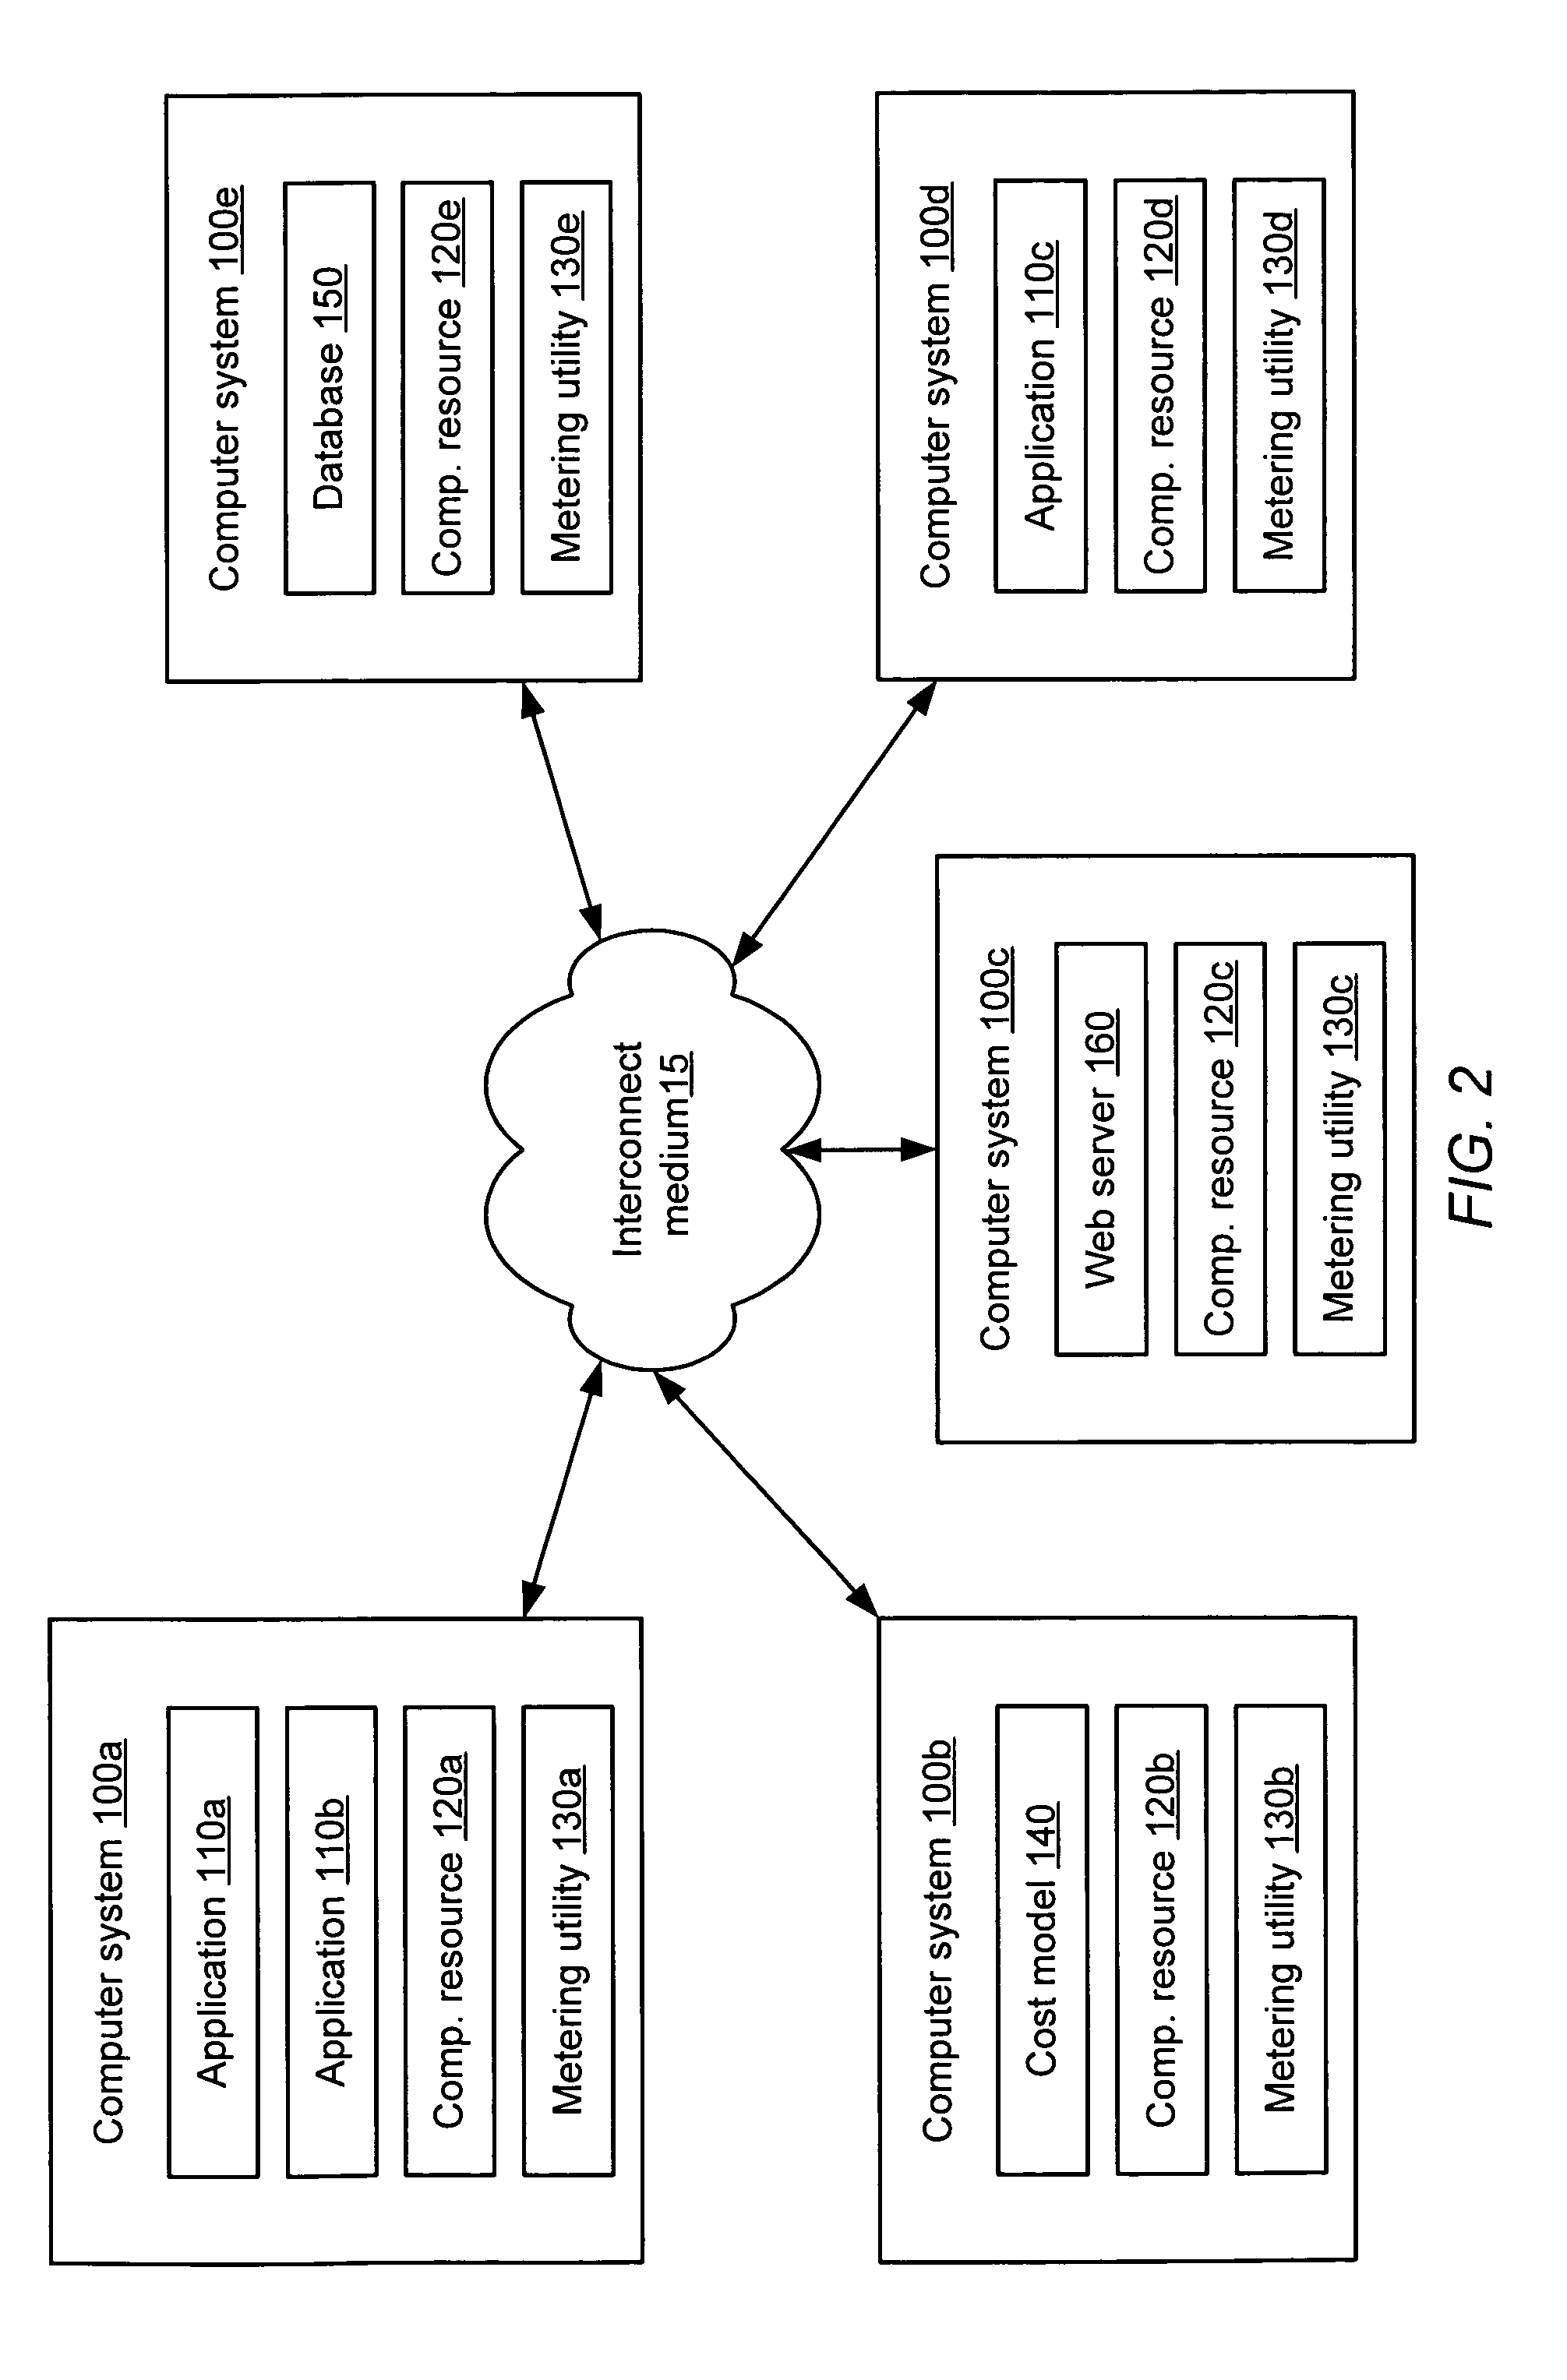 System and method for application resource utilization metering and cost allocation in a utility computing environment